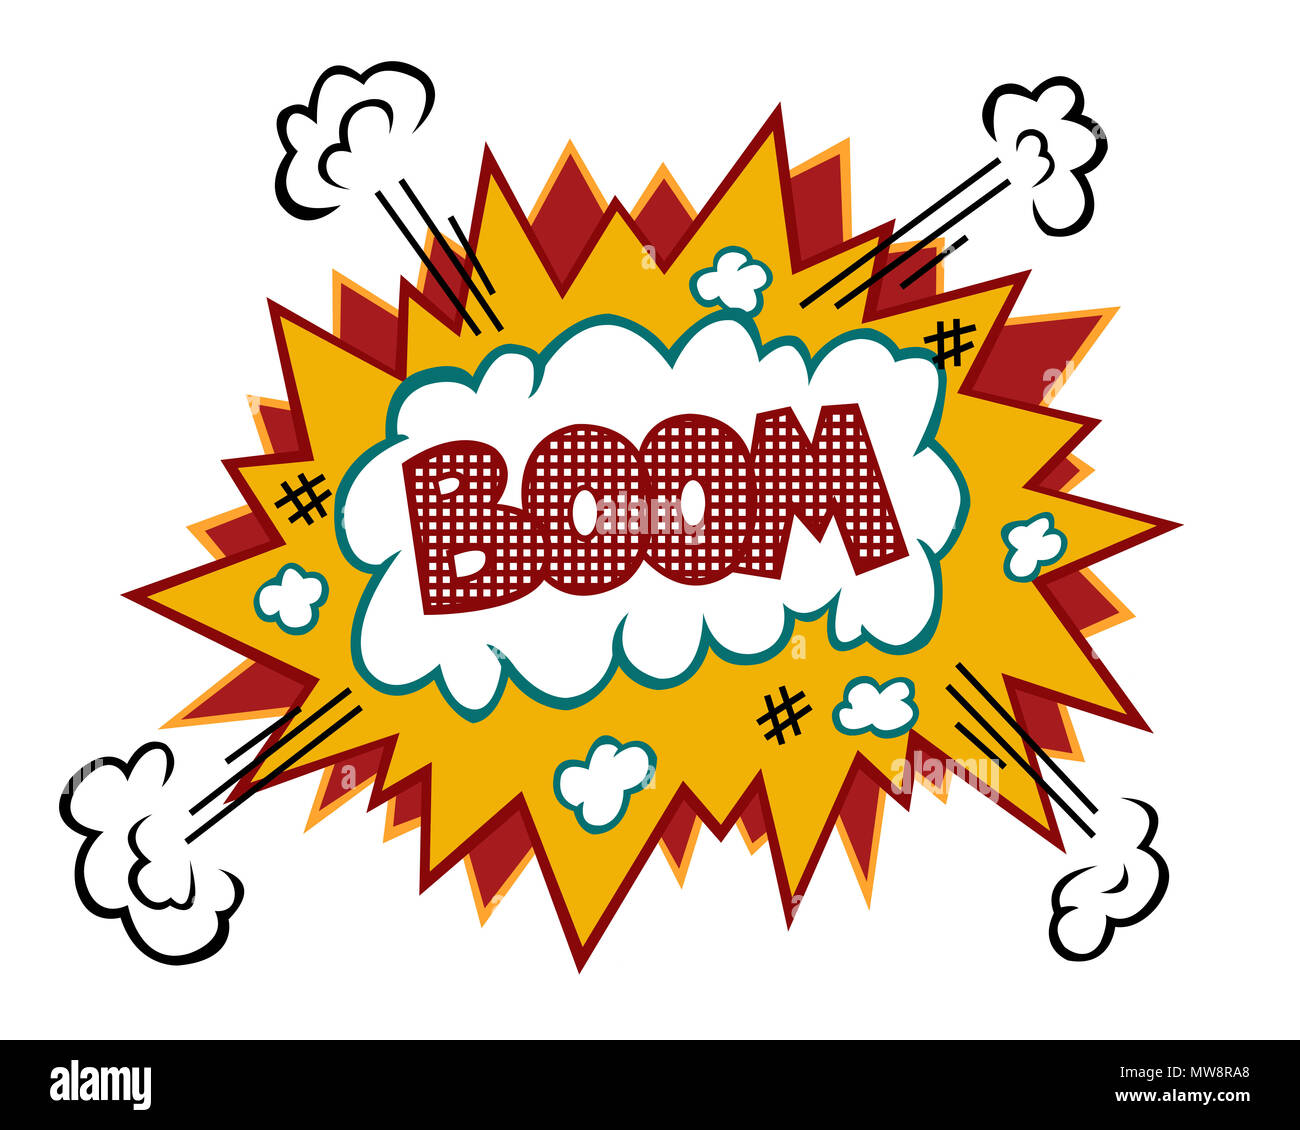 Boom comic text illustration isolated on white Stock Photo